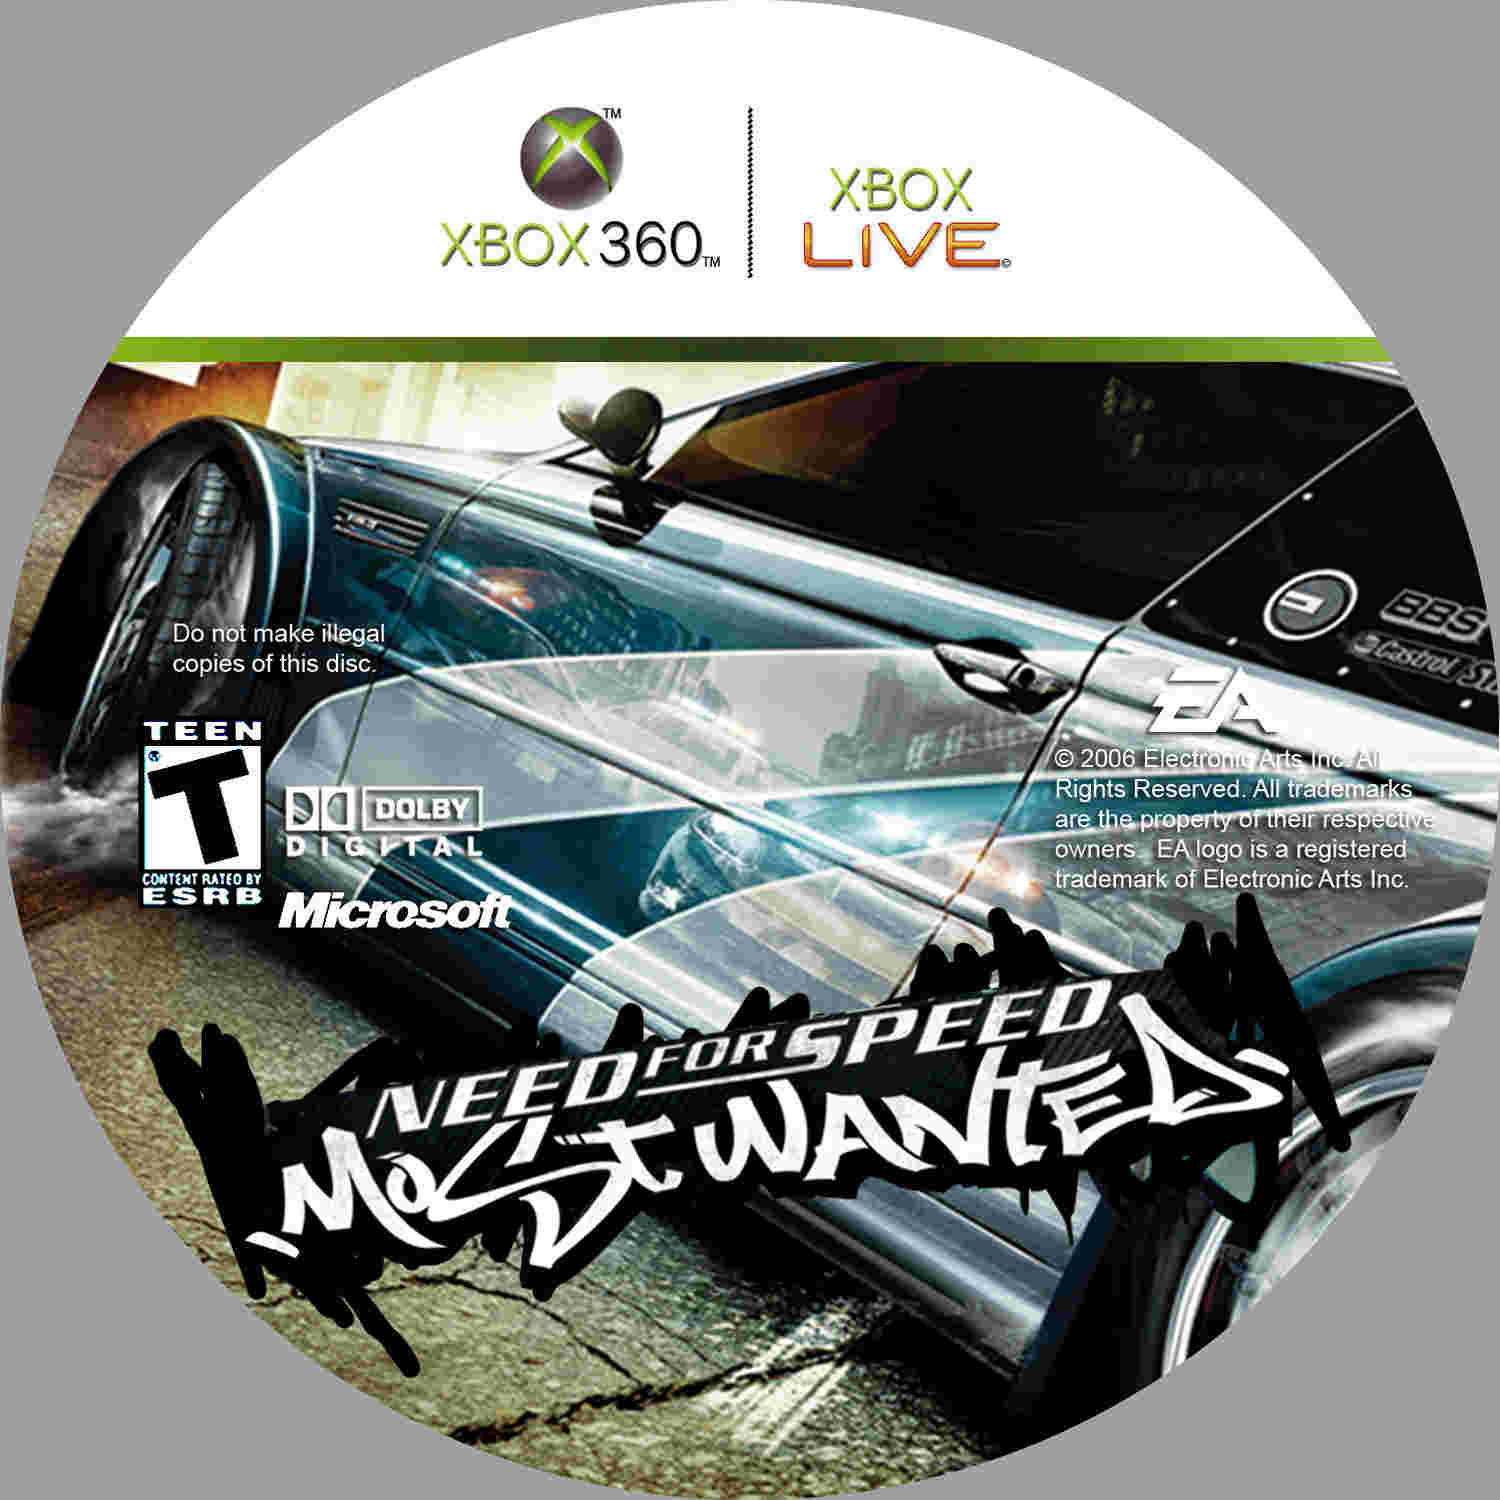 Nfs most wanted xbox. Need for Speed Xbox 360 диск. NFS most wanted диск Xbox 360. NFS most wanted 2005 Xbox 360 русская версия. NFS most wanted 2005 диск.